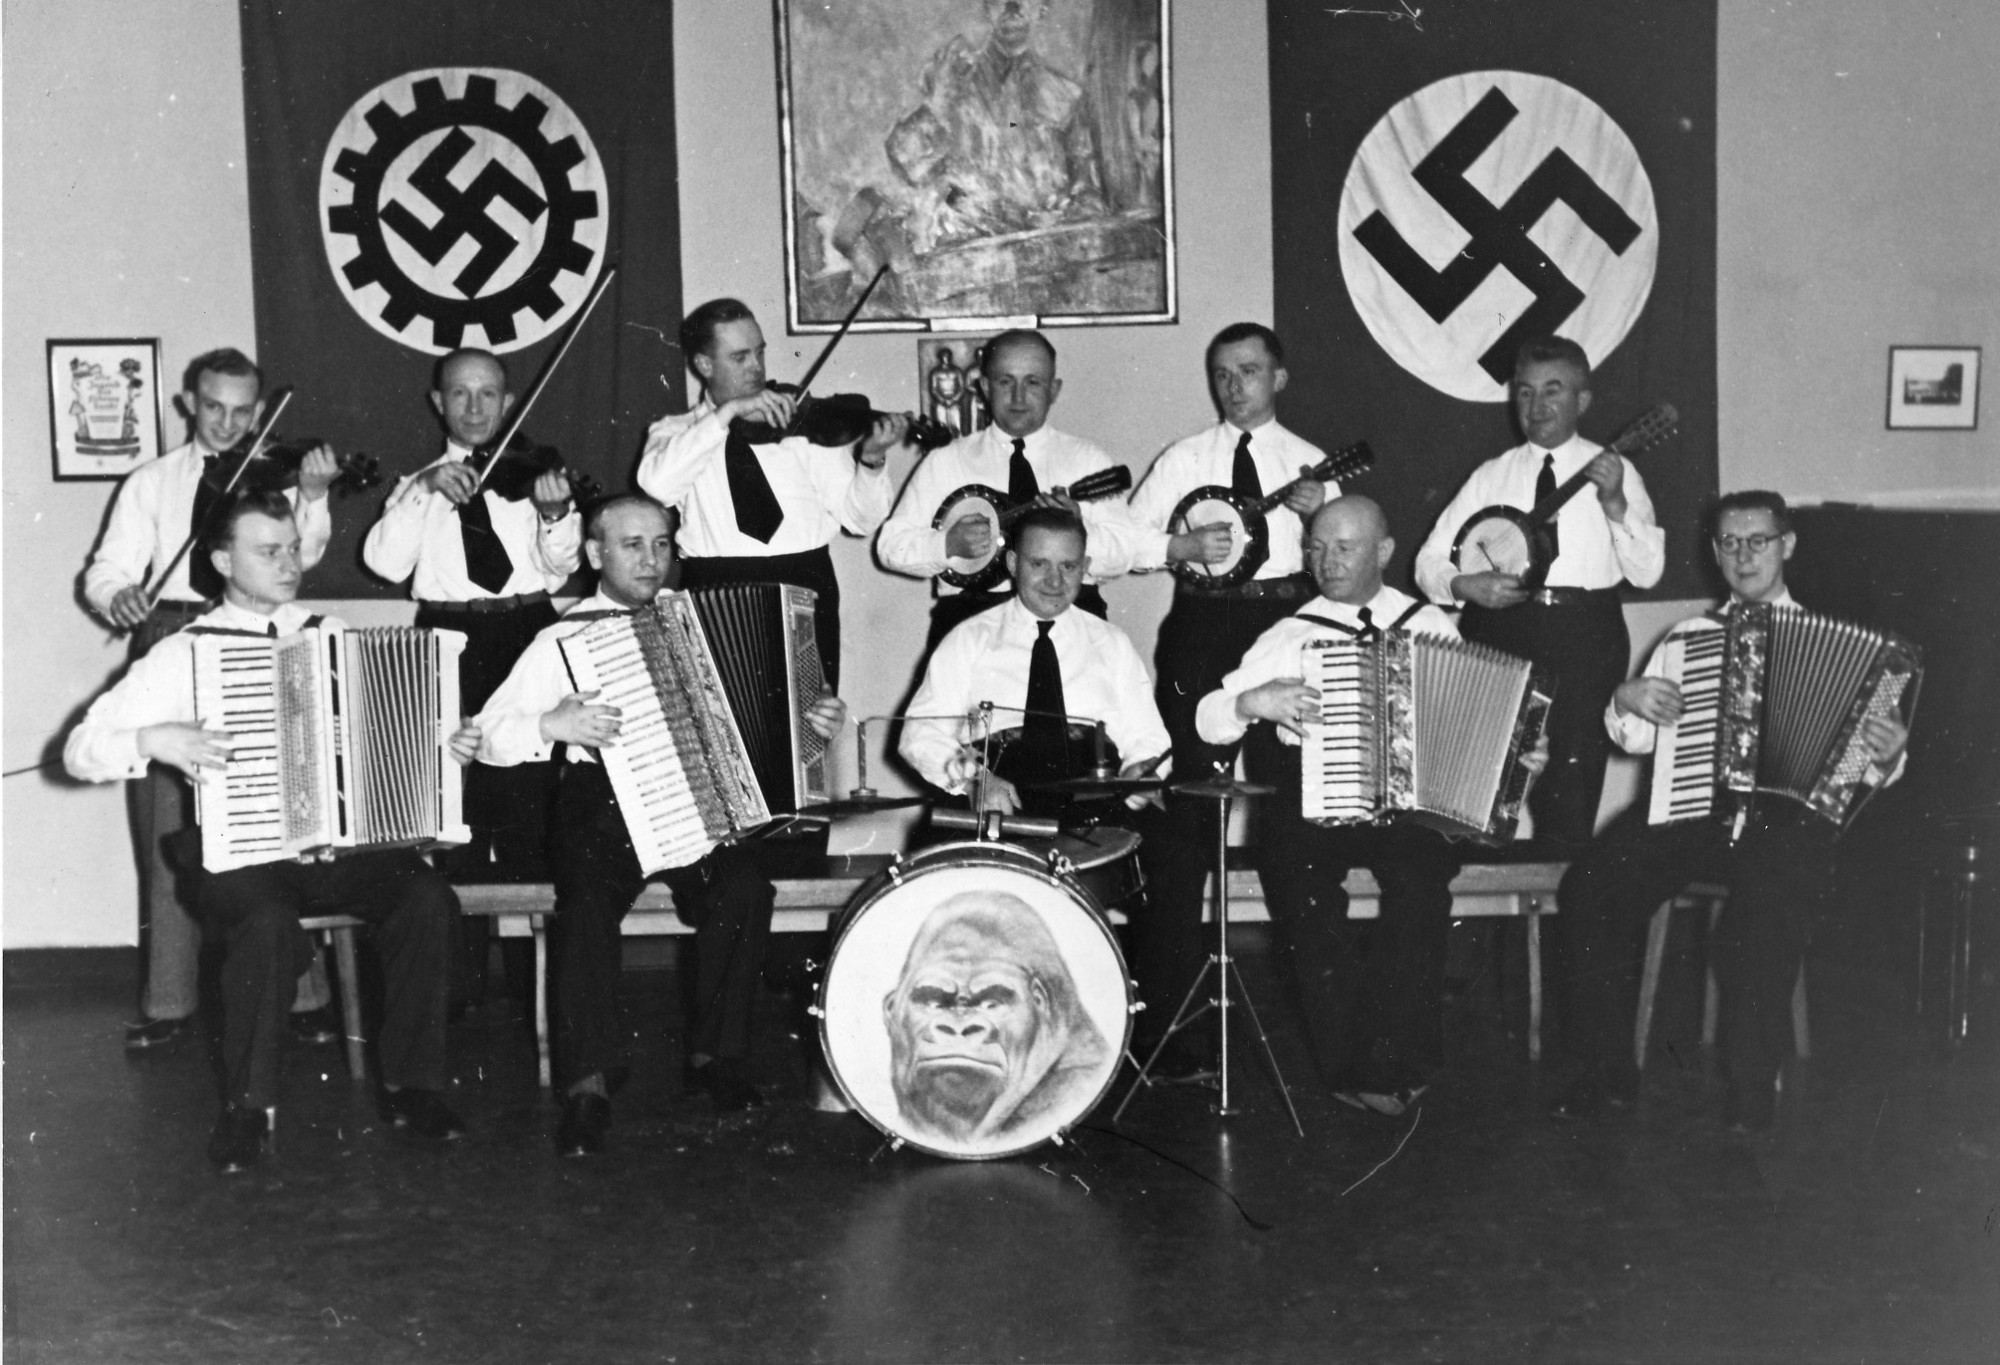 Black and white photograph: eleven people with string and percussion instruments and accordions. In the background are two large flags with swastikas and a painting. The bass drum displays a picture of a gorilla’s face.